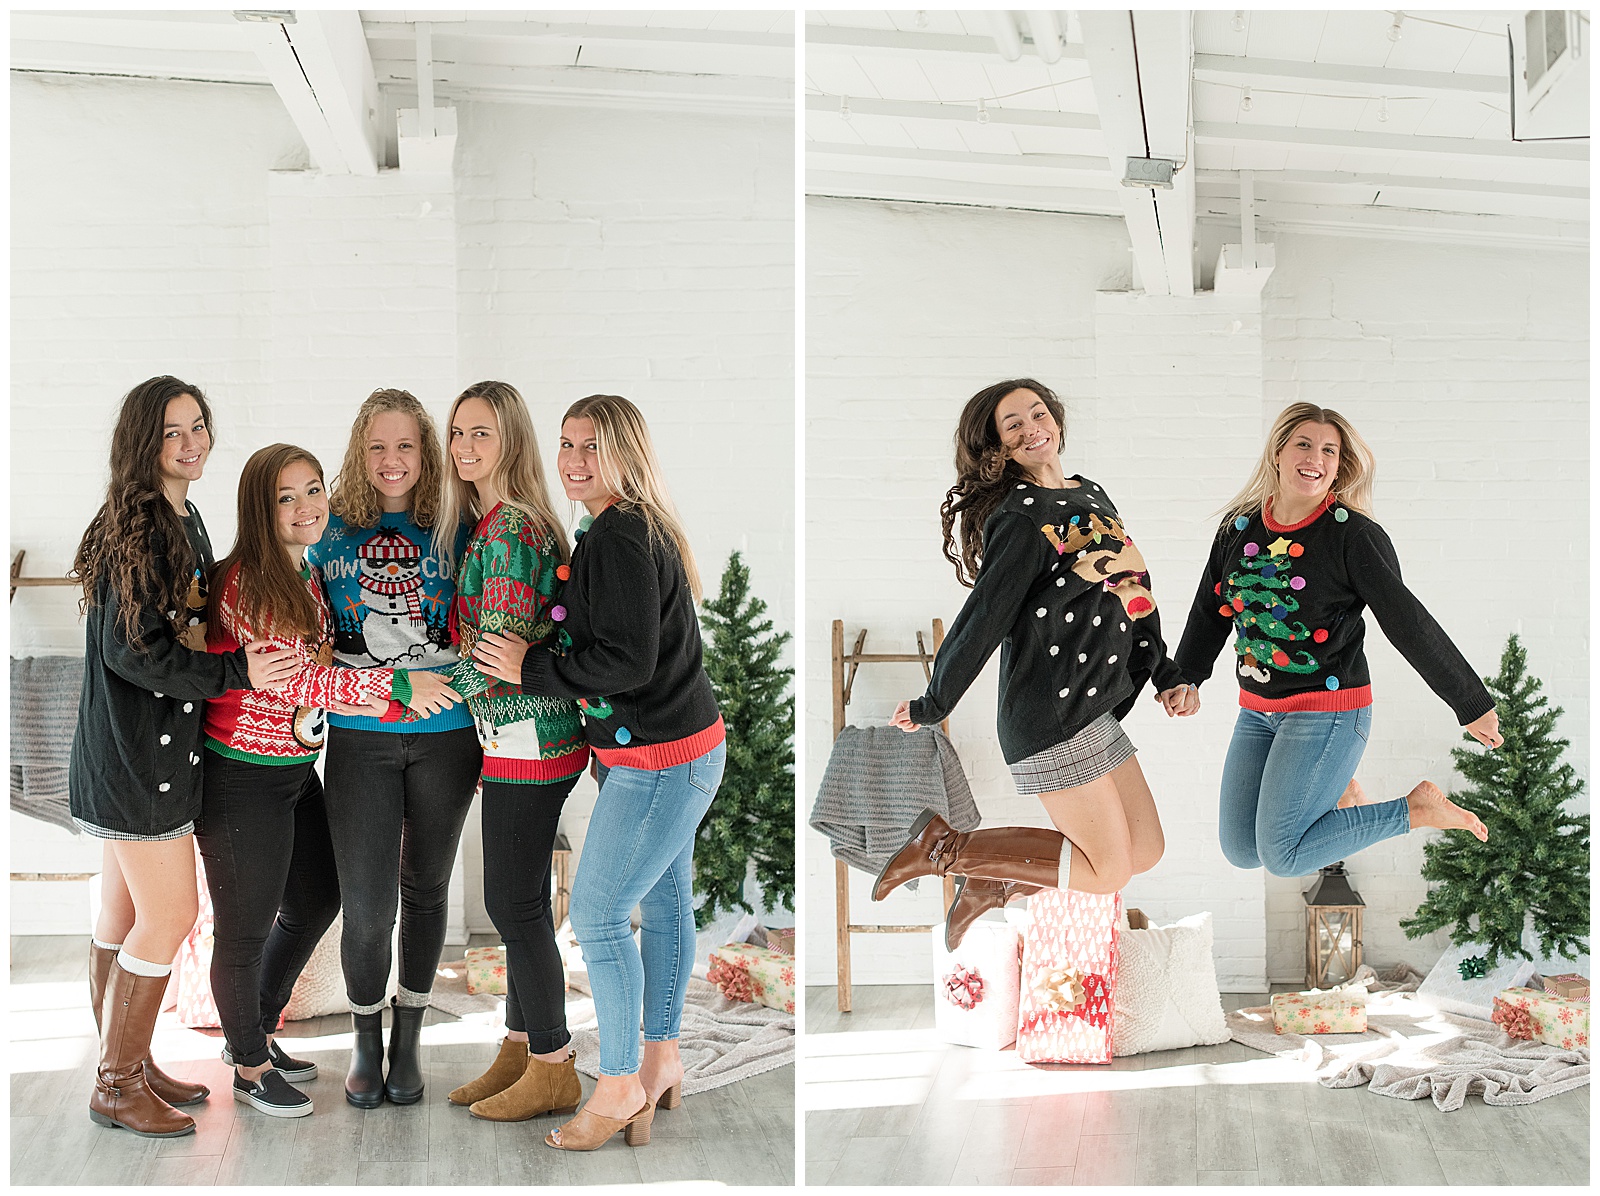 girls hugging and girls jumping all smiling in front of christmas decorations in white room